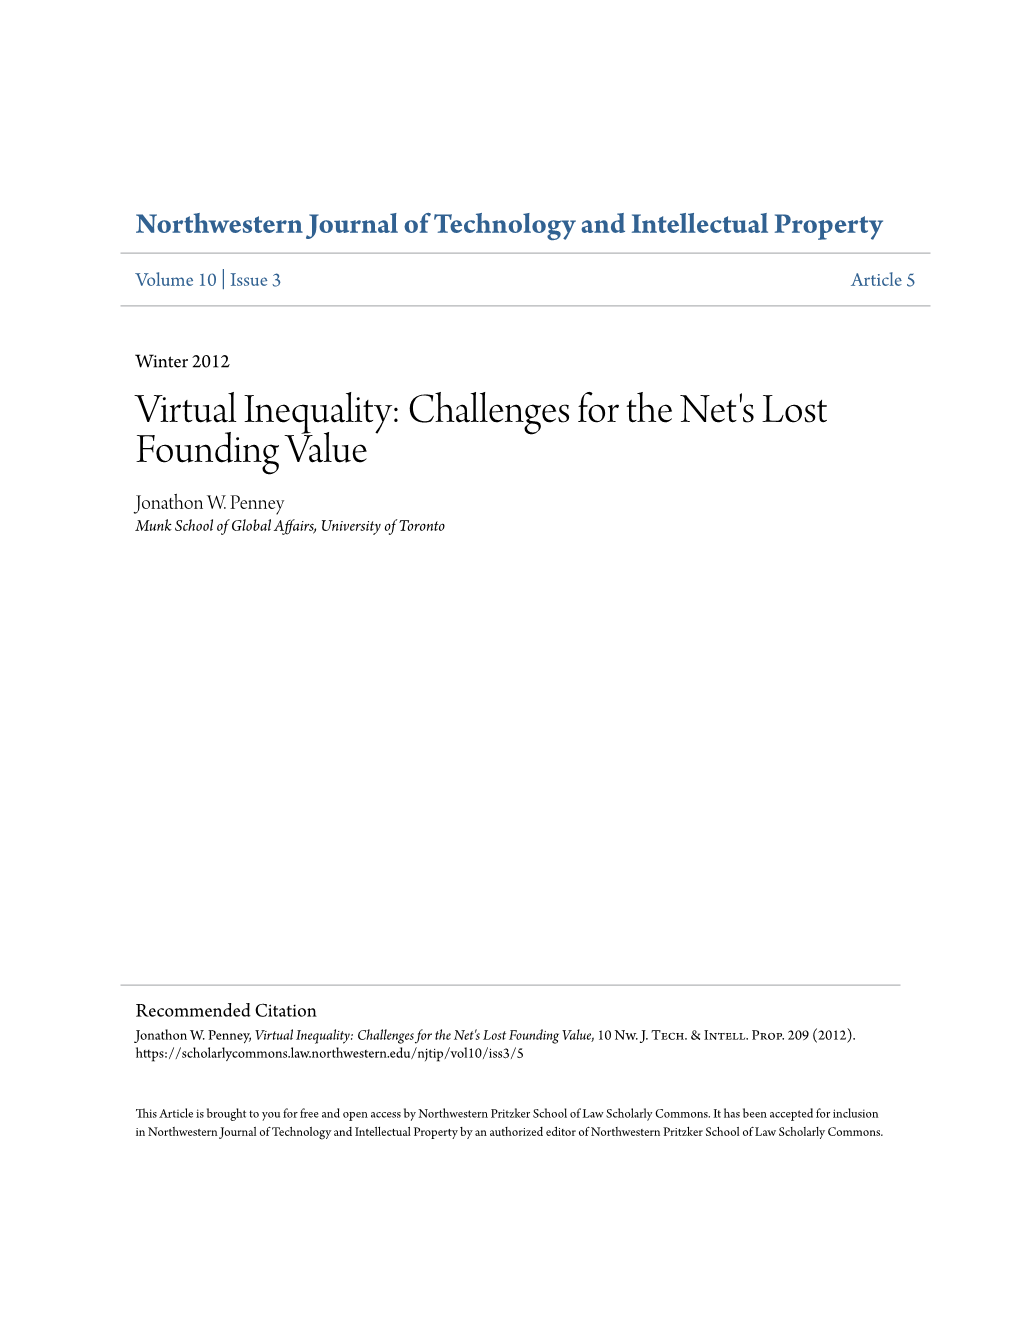 Virtual Inequality: Challenges for the Net's Lost Founding Value Jonathon W